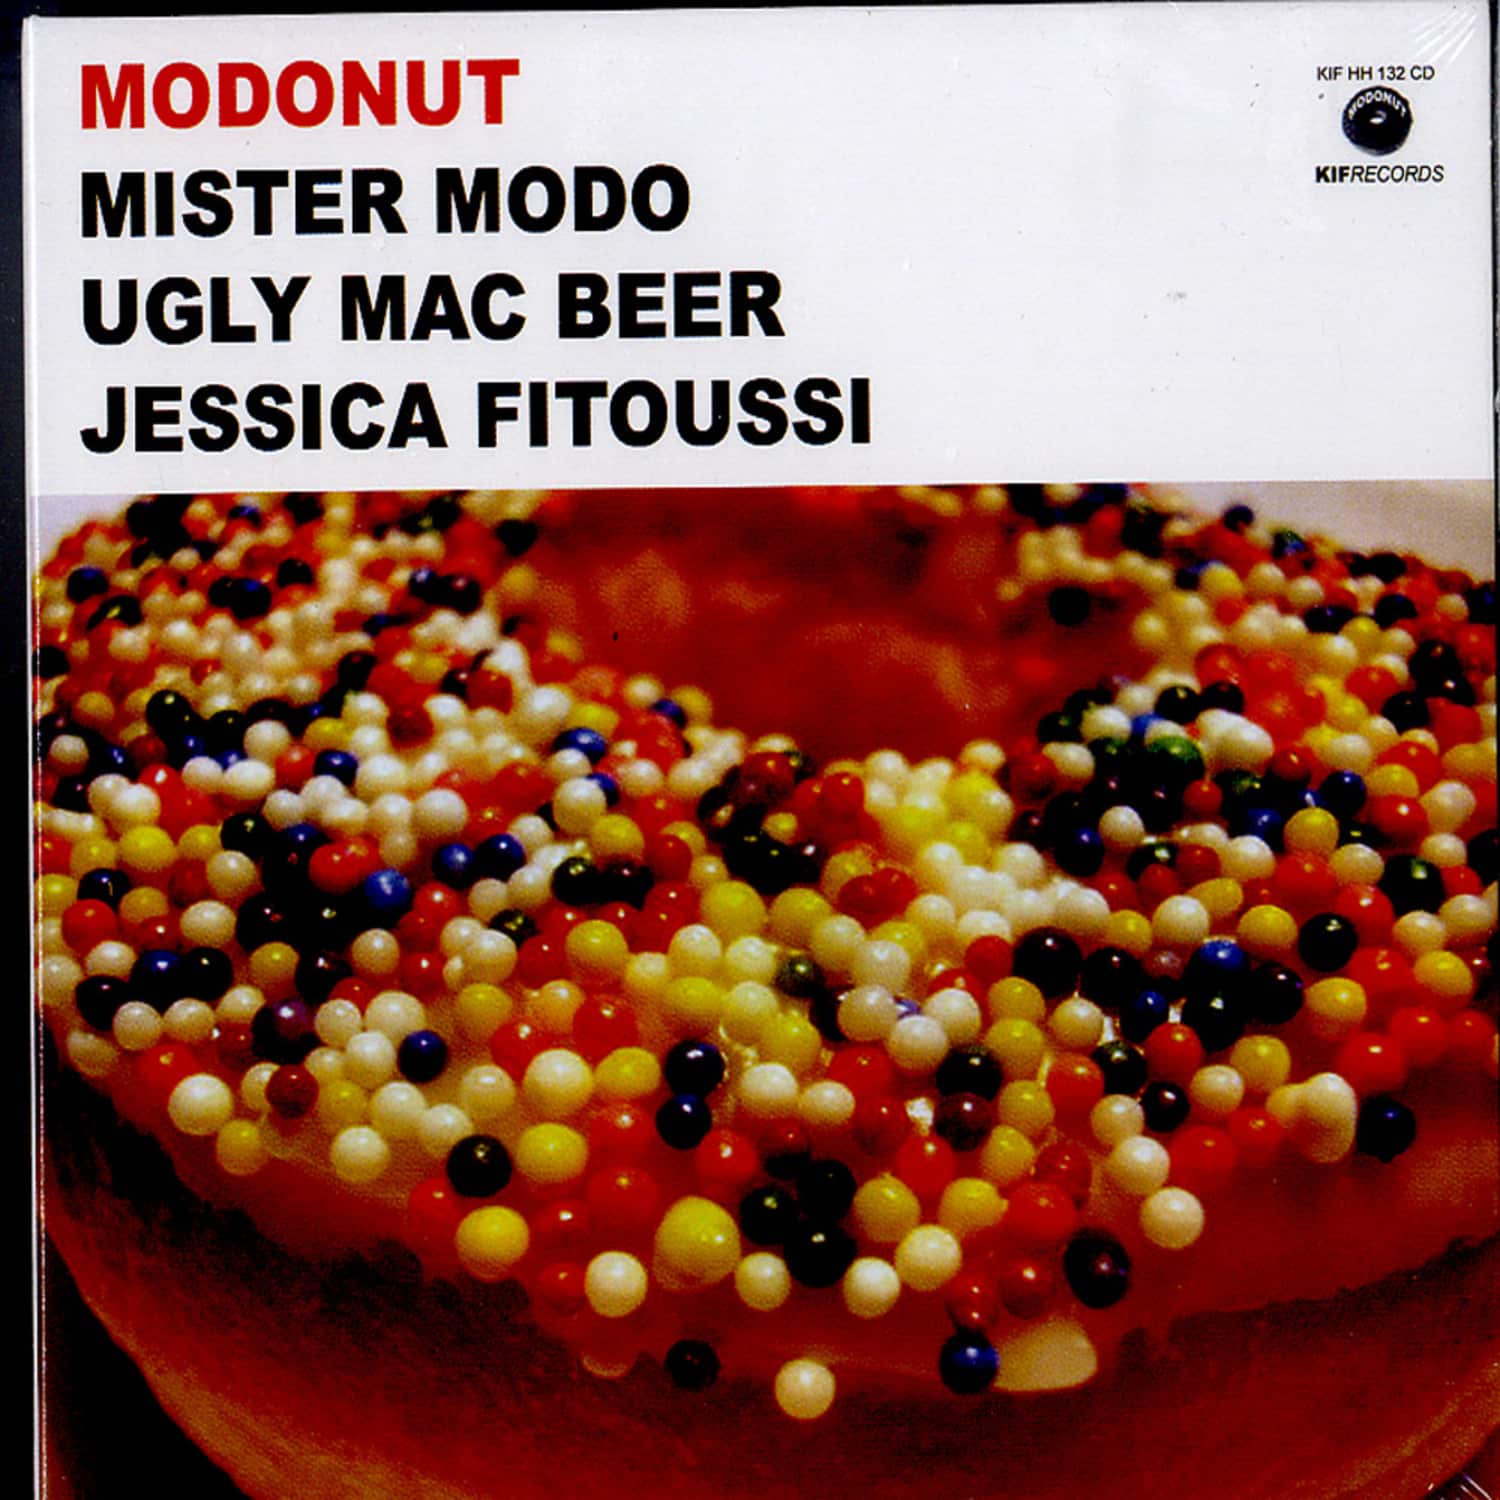 Modonut feat. Jessica Fitoussi - MISTER MODO UGLY MAC BEER 